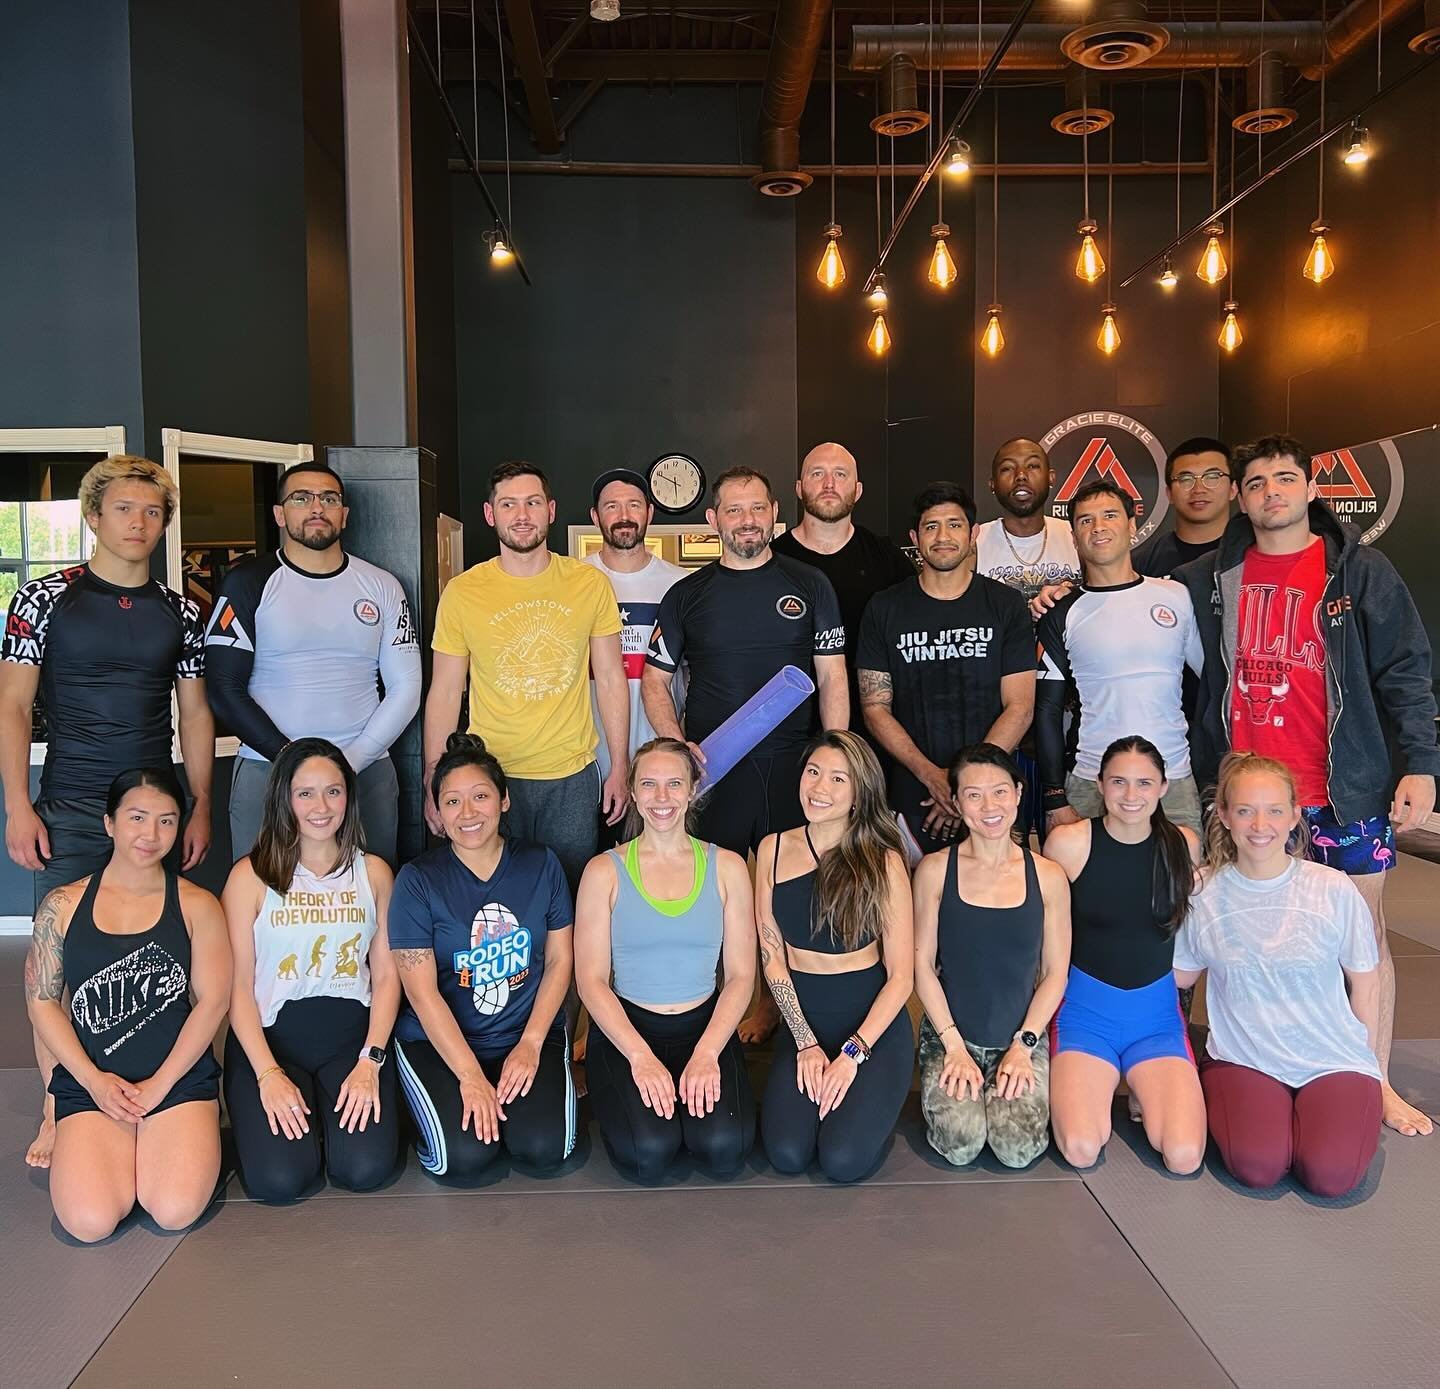 Amazing Yoga class today! Starting May 7th, get ready for yoga three days a week with @eri.catcow ! Mark your calendars: Tuesdays at 5pm, Fridays at 10:30am, and Saturdays at 9am. Stay tuned for more details!

#houstonyoga #fitness #wellness #namaste